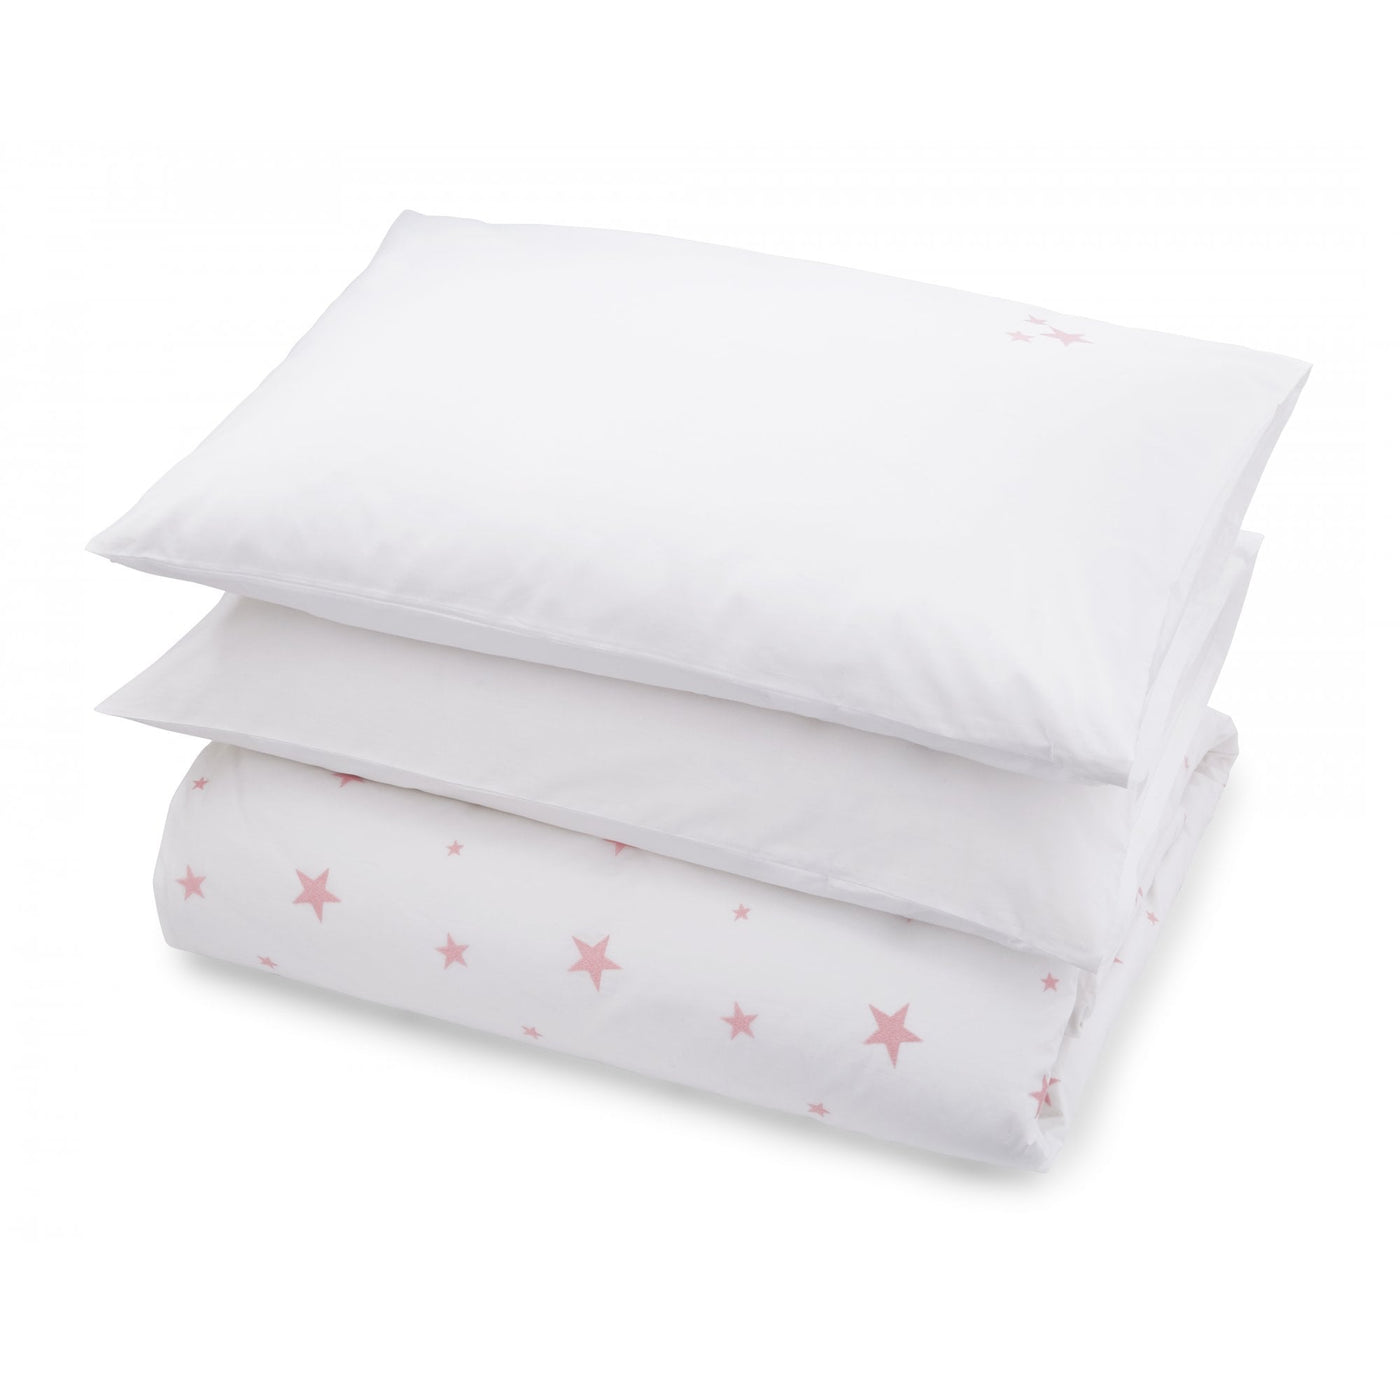 Scattered Stars White and Pink Organic Cotton Pillowcase